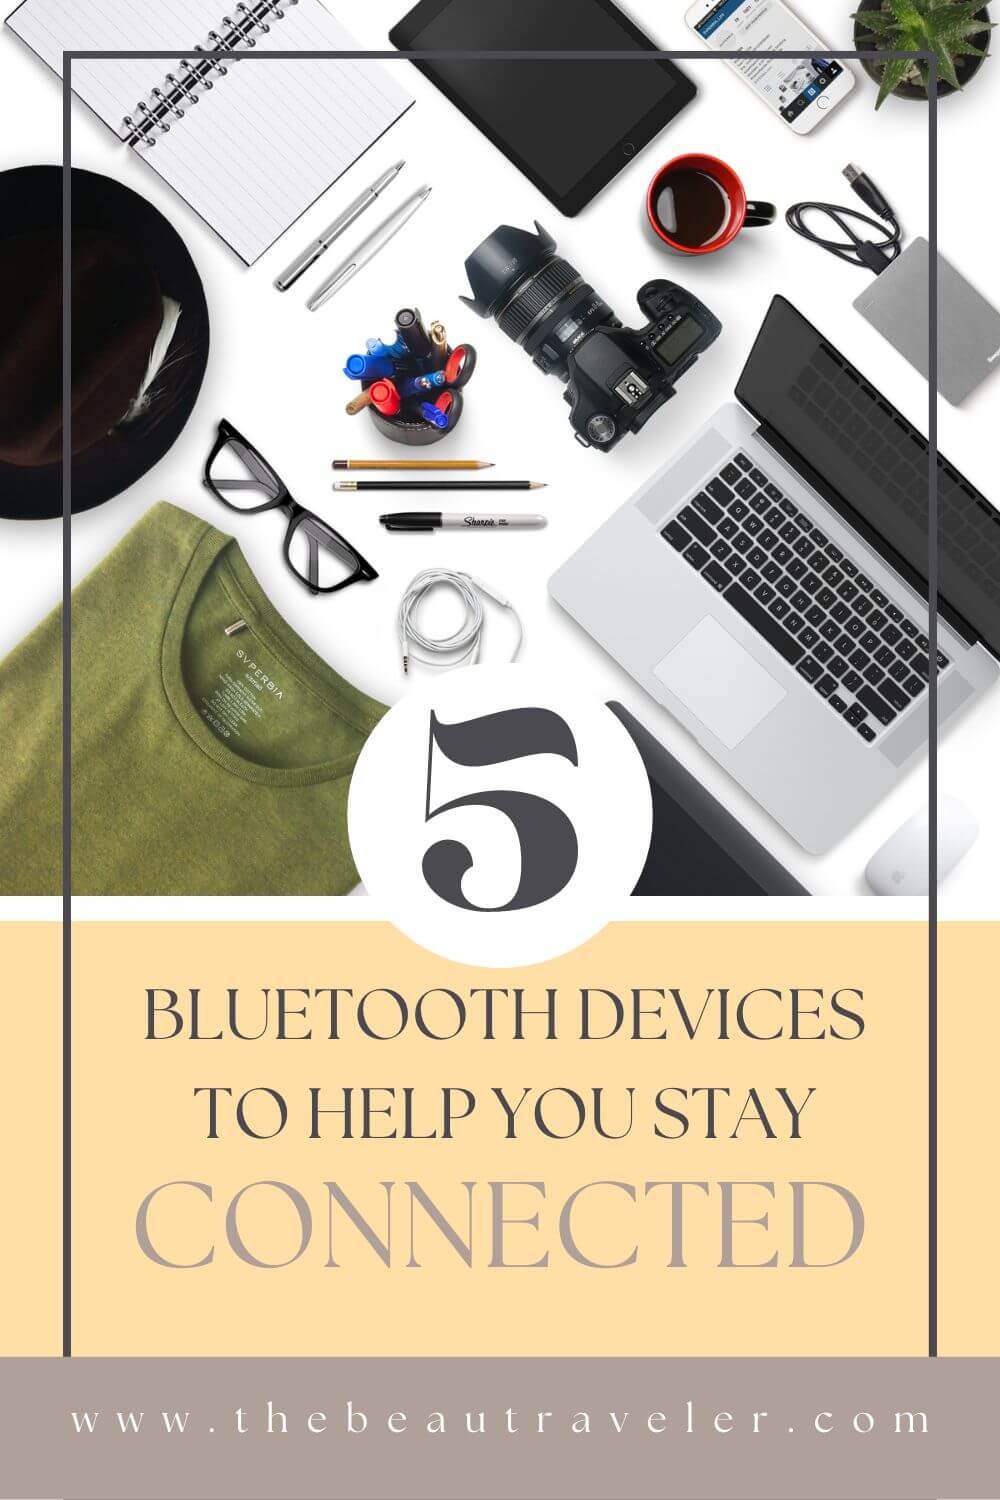 5 Bluetooth Devices to Help You Stay Connected While Traveling - The BeauTraveler